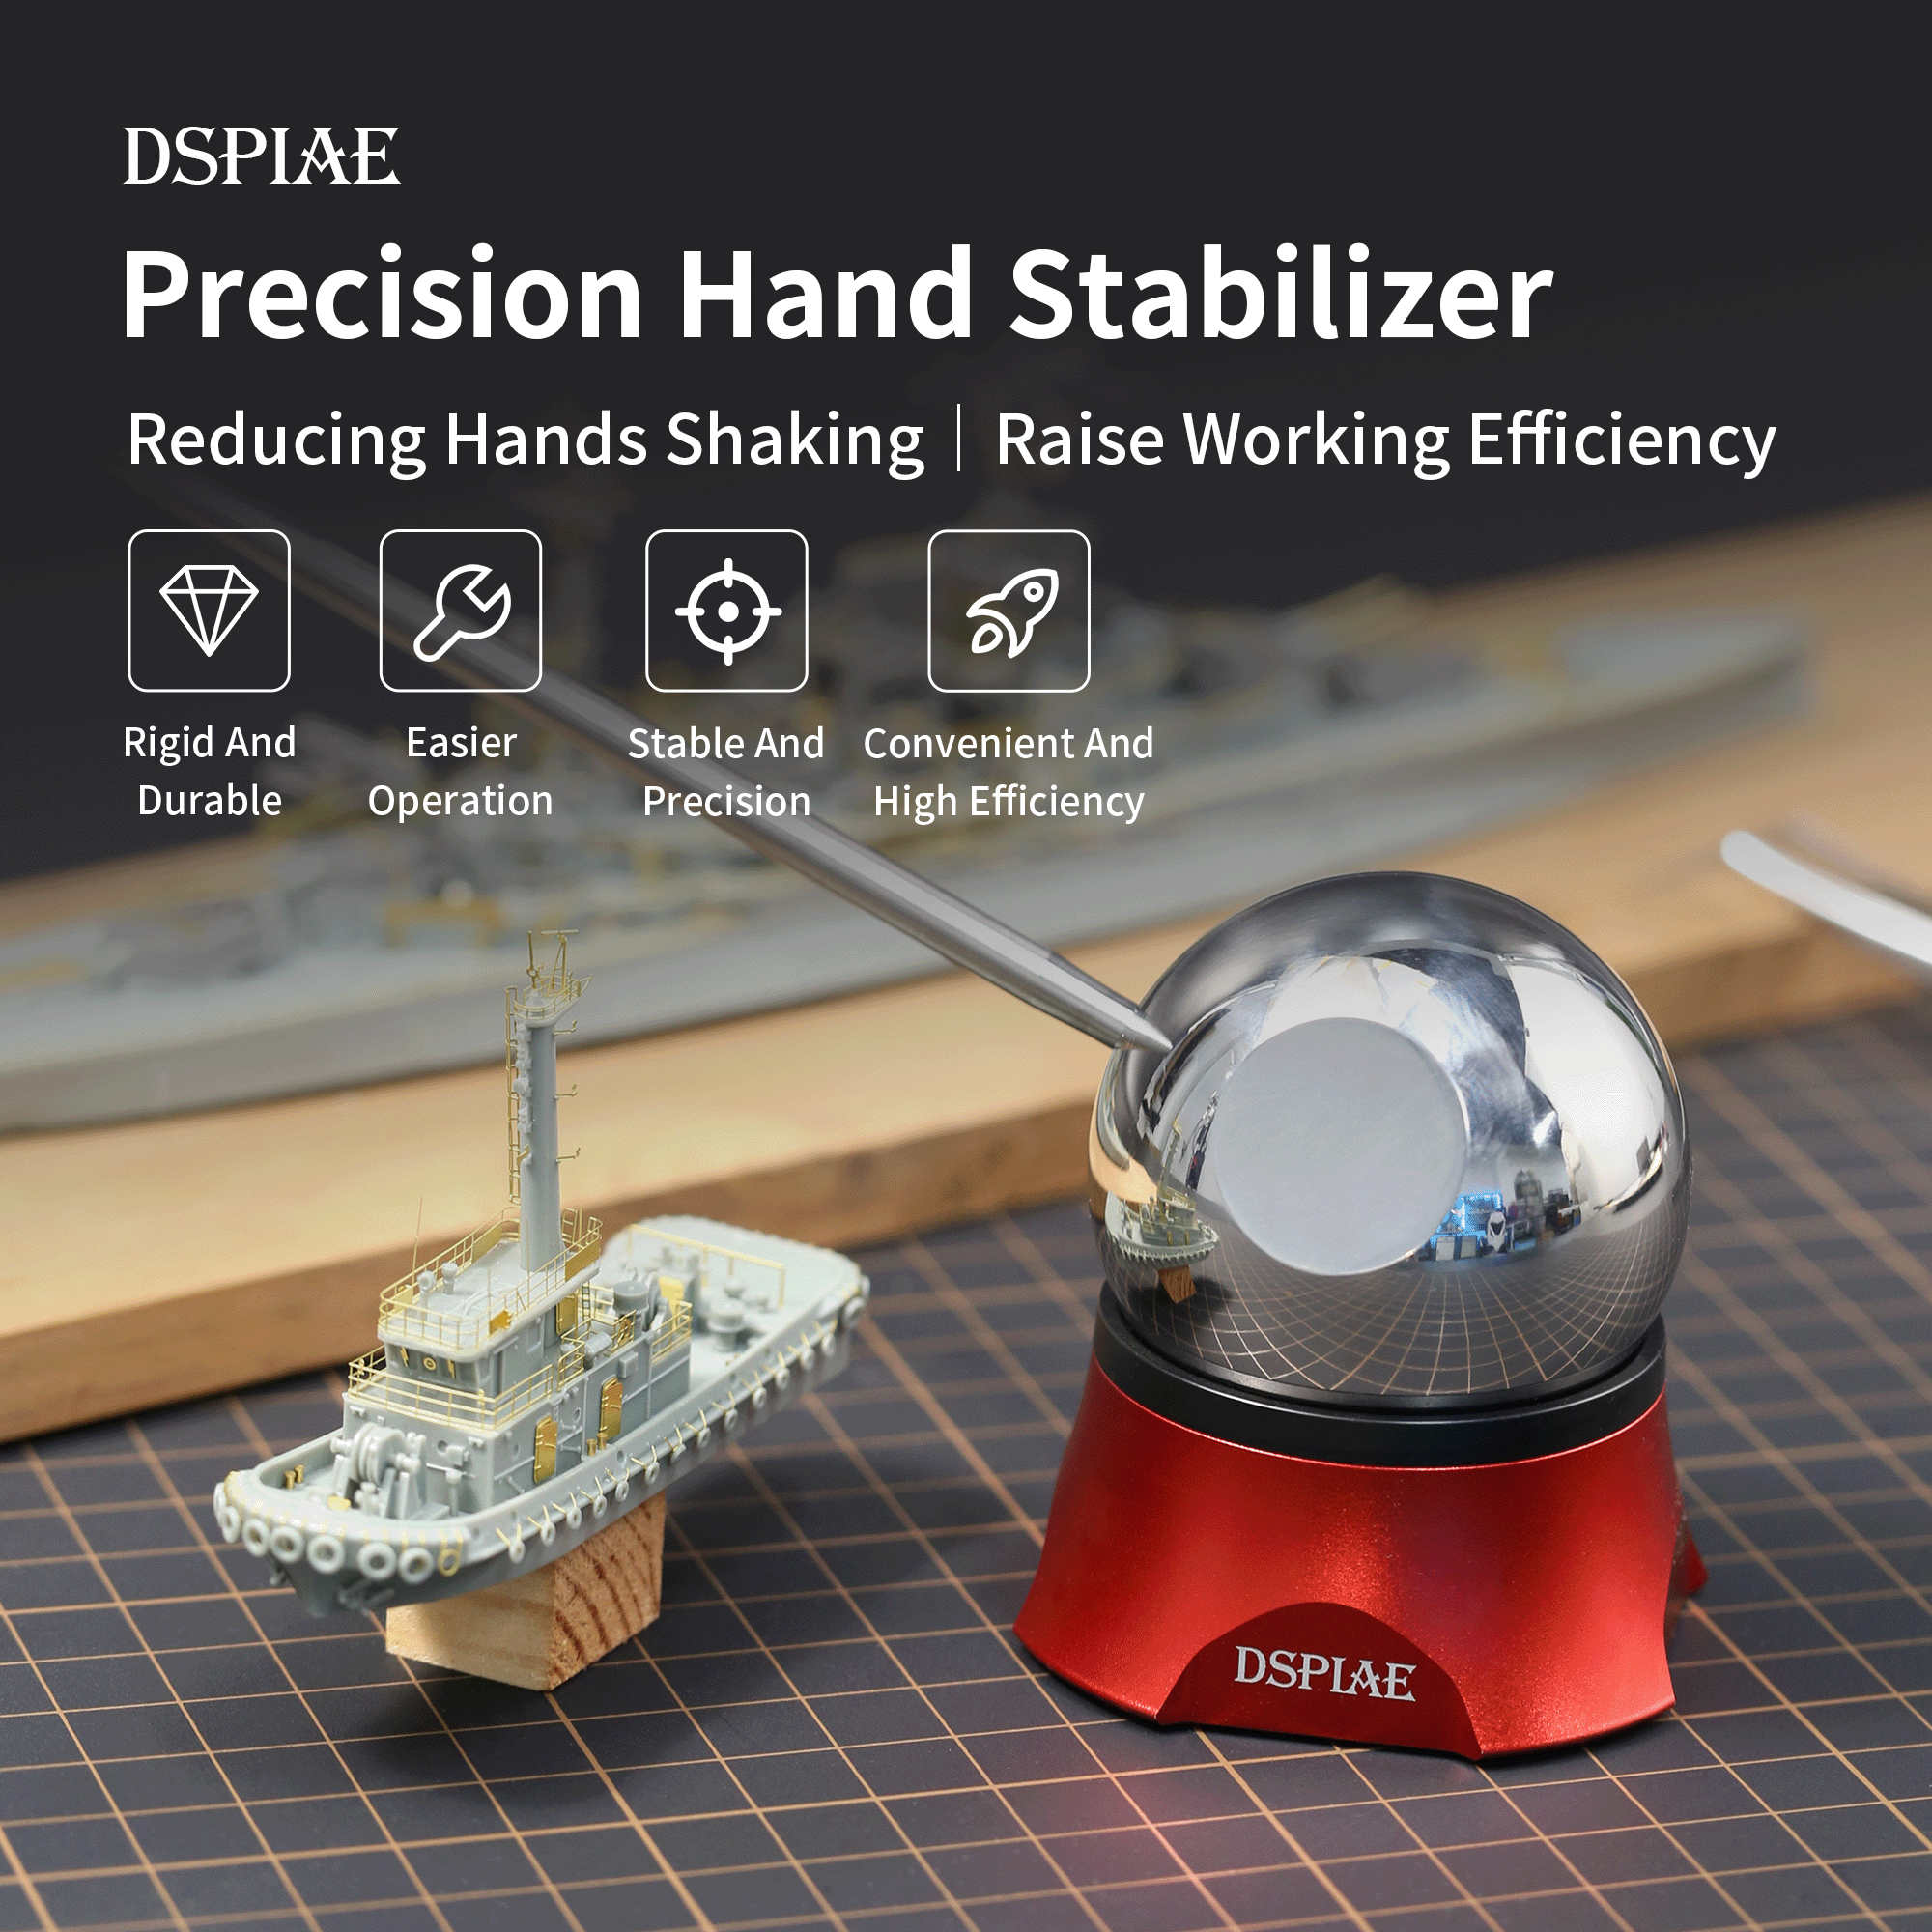 Dspiae AT-HS Precision Hand Stabilizer